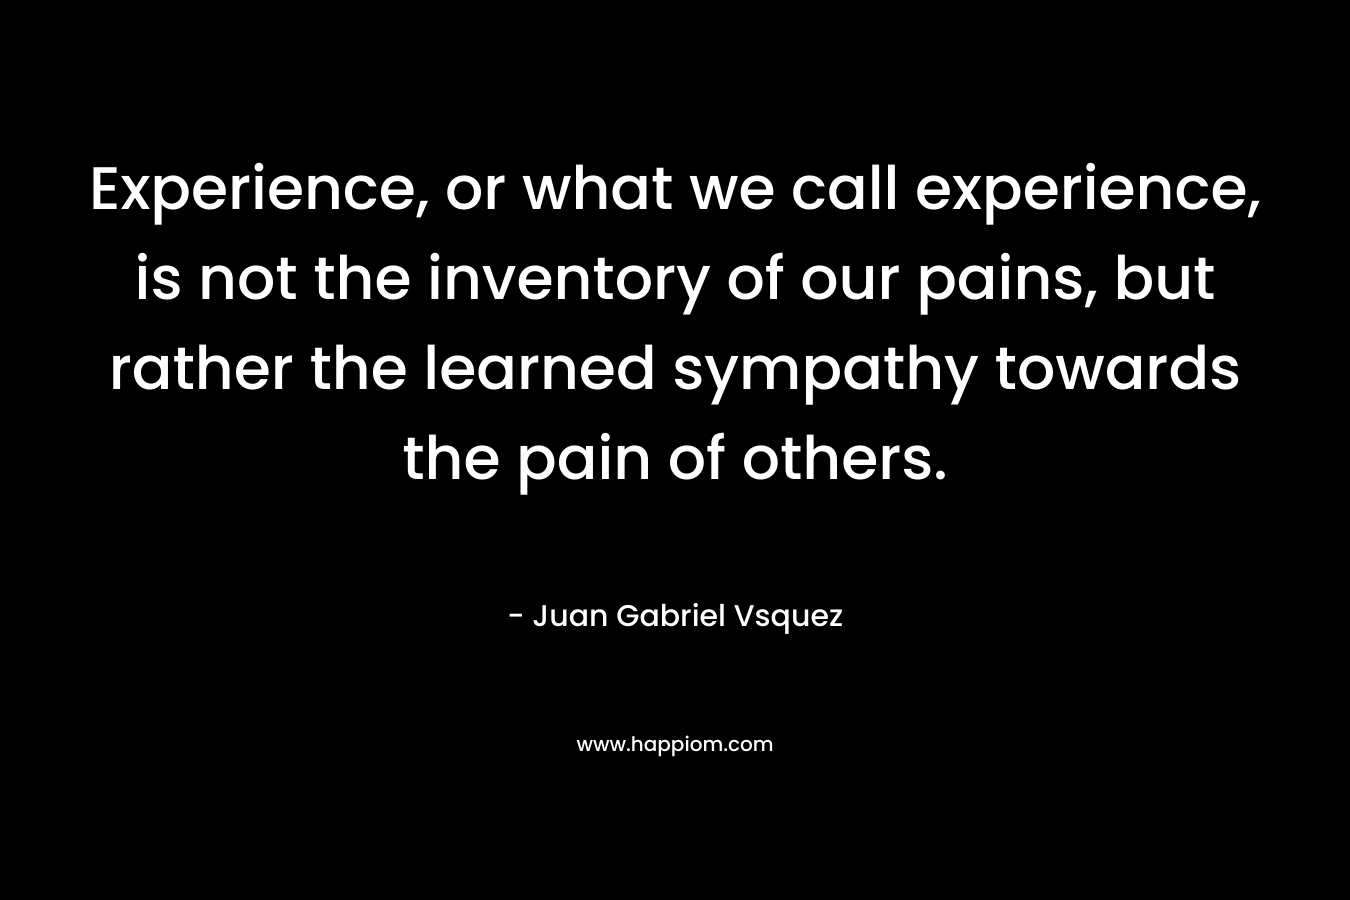 Experience, or what we call experience, is not the inventory of our pains, but rather the learned sympathy towards the pain of others.